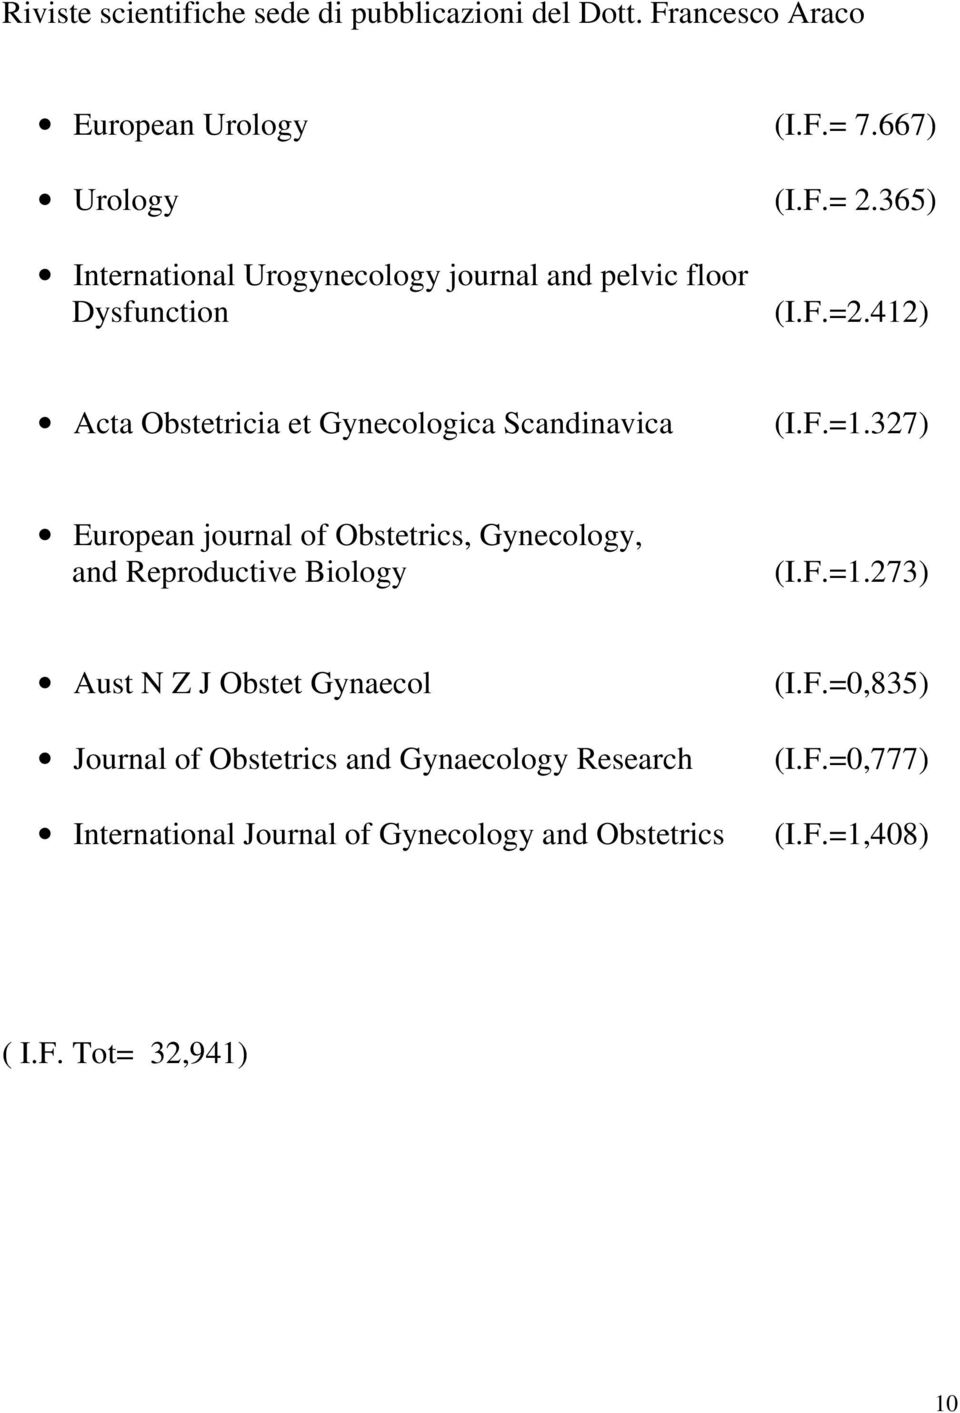 F.=1.327) European journal of Obstetrics, Gynecology, and Reproductive Biology (I.F.=1.273) Aust N Z J Obstet Gynaecol Journal of